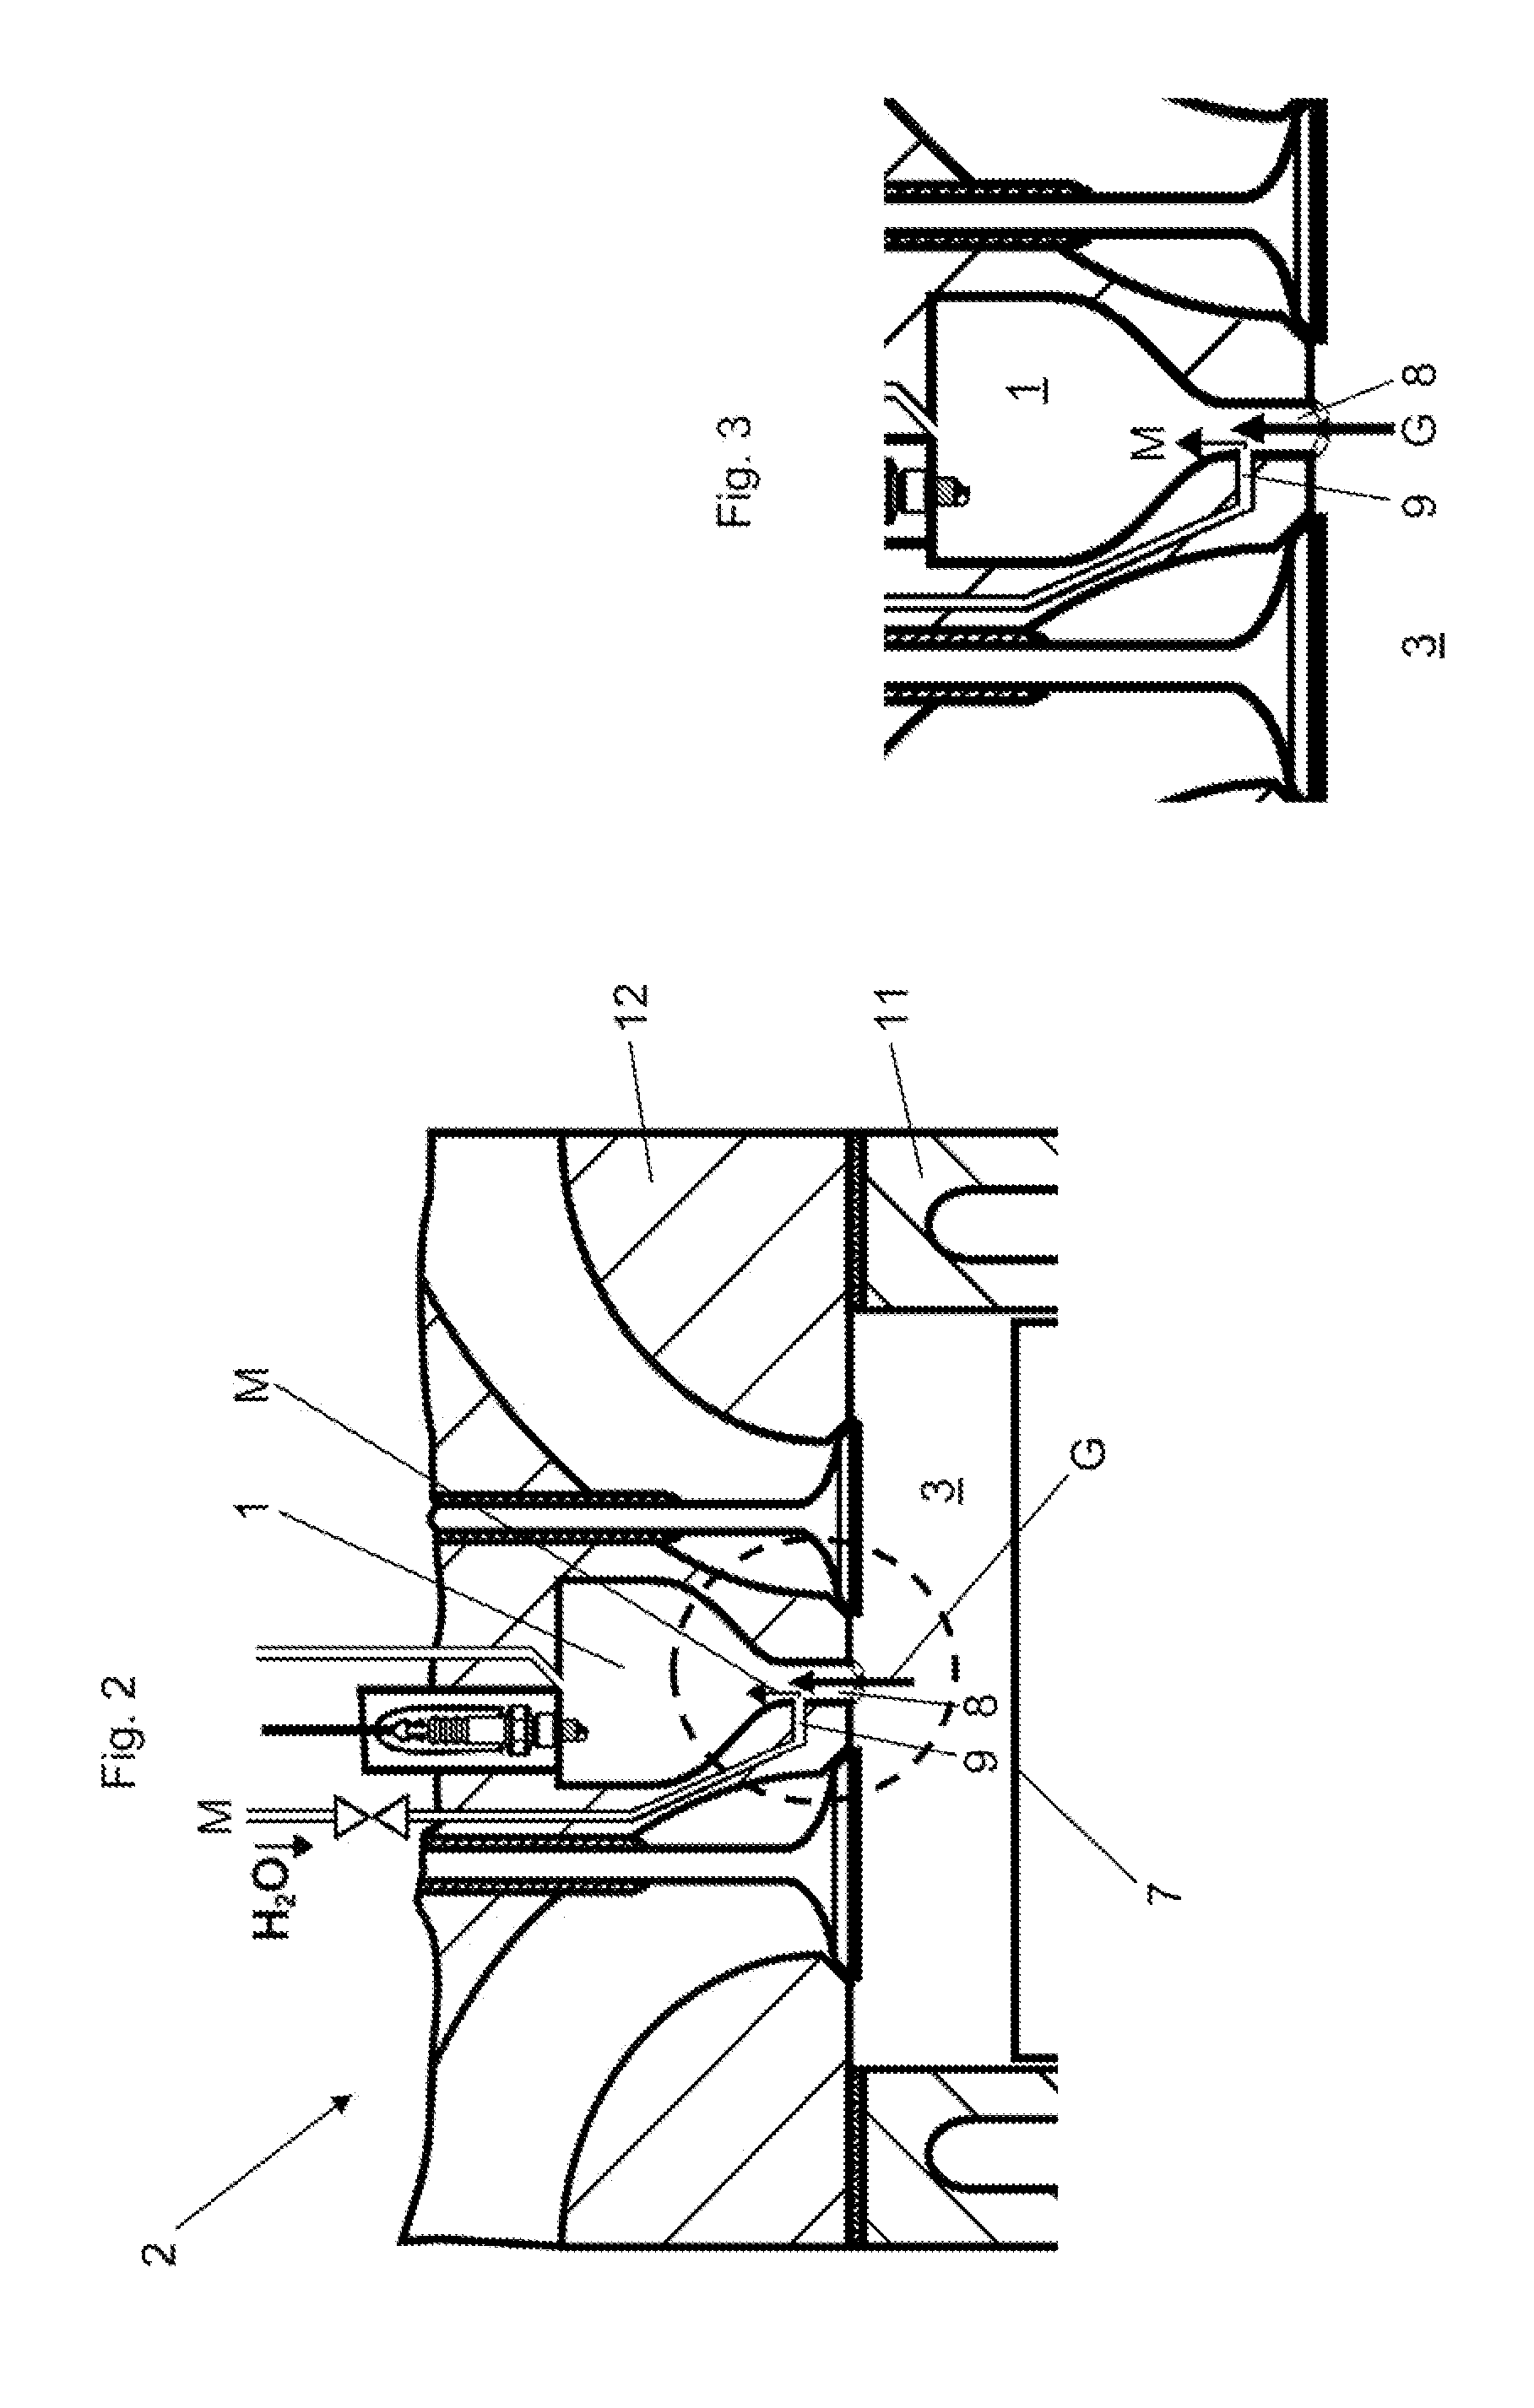 Method of operating a combustion engine provided with at least one flushed prechamber